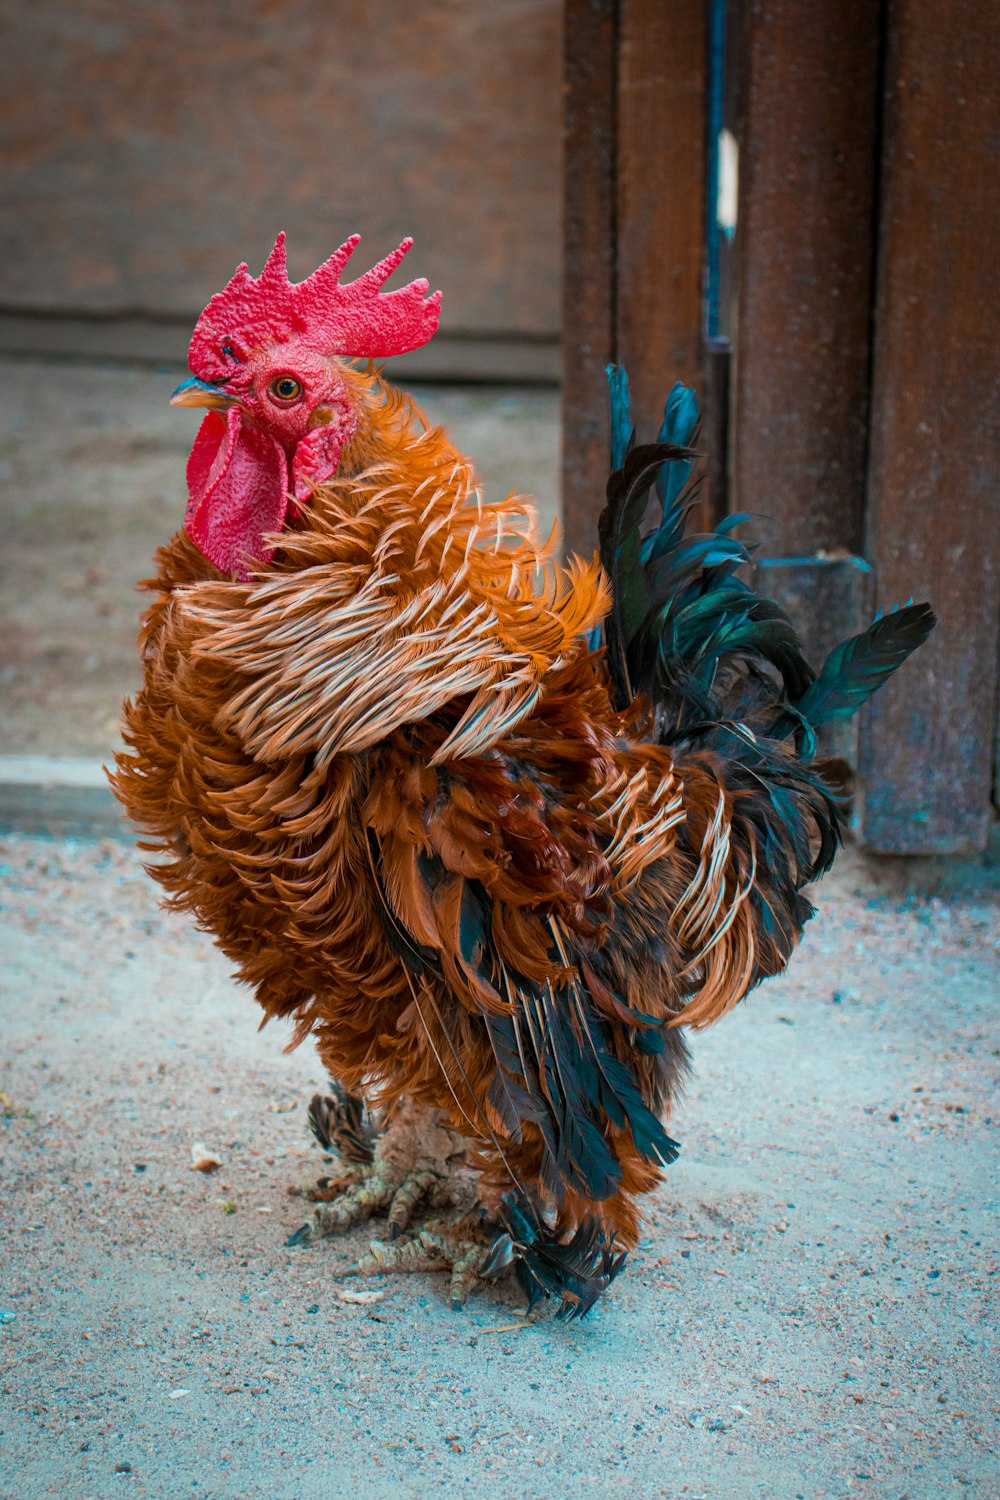 a rooster standing on pavement